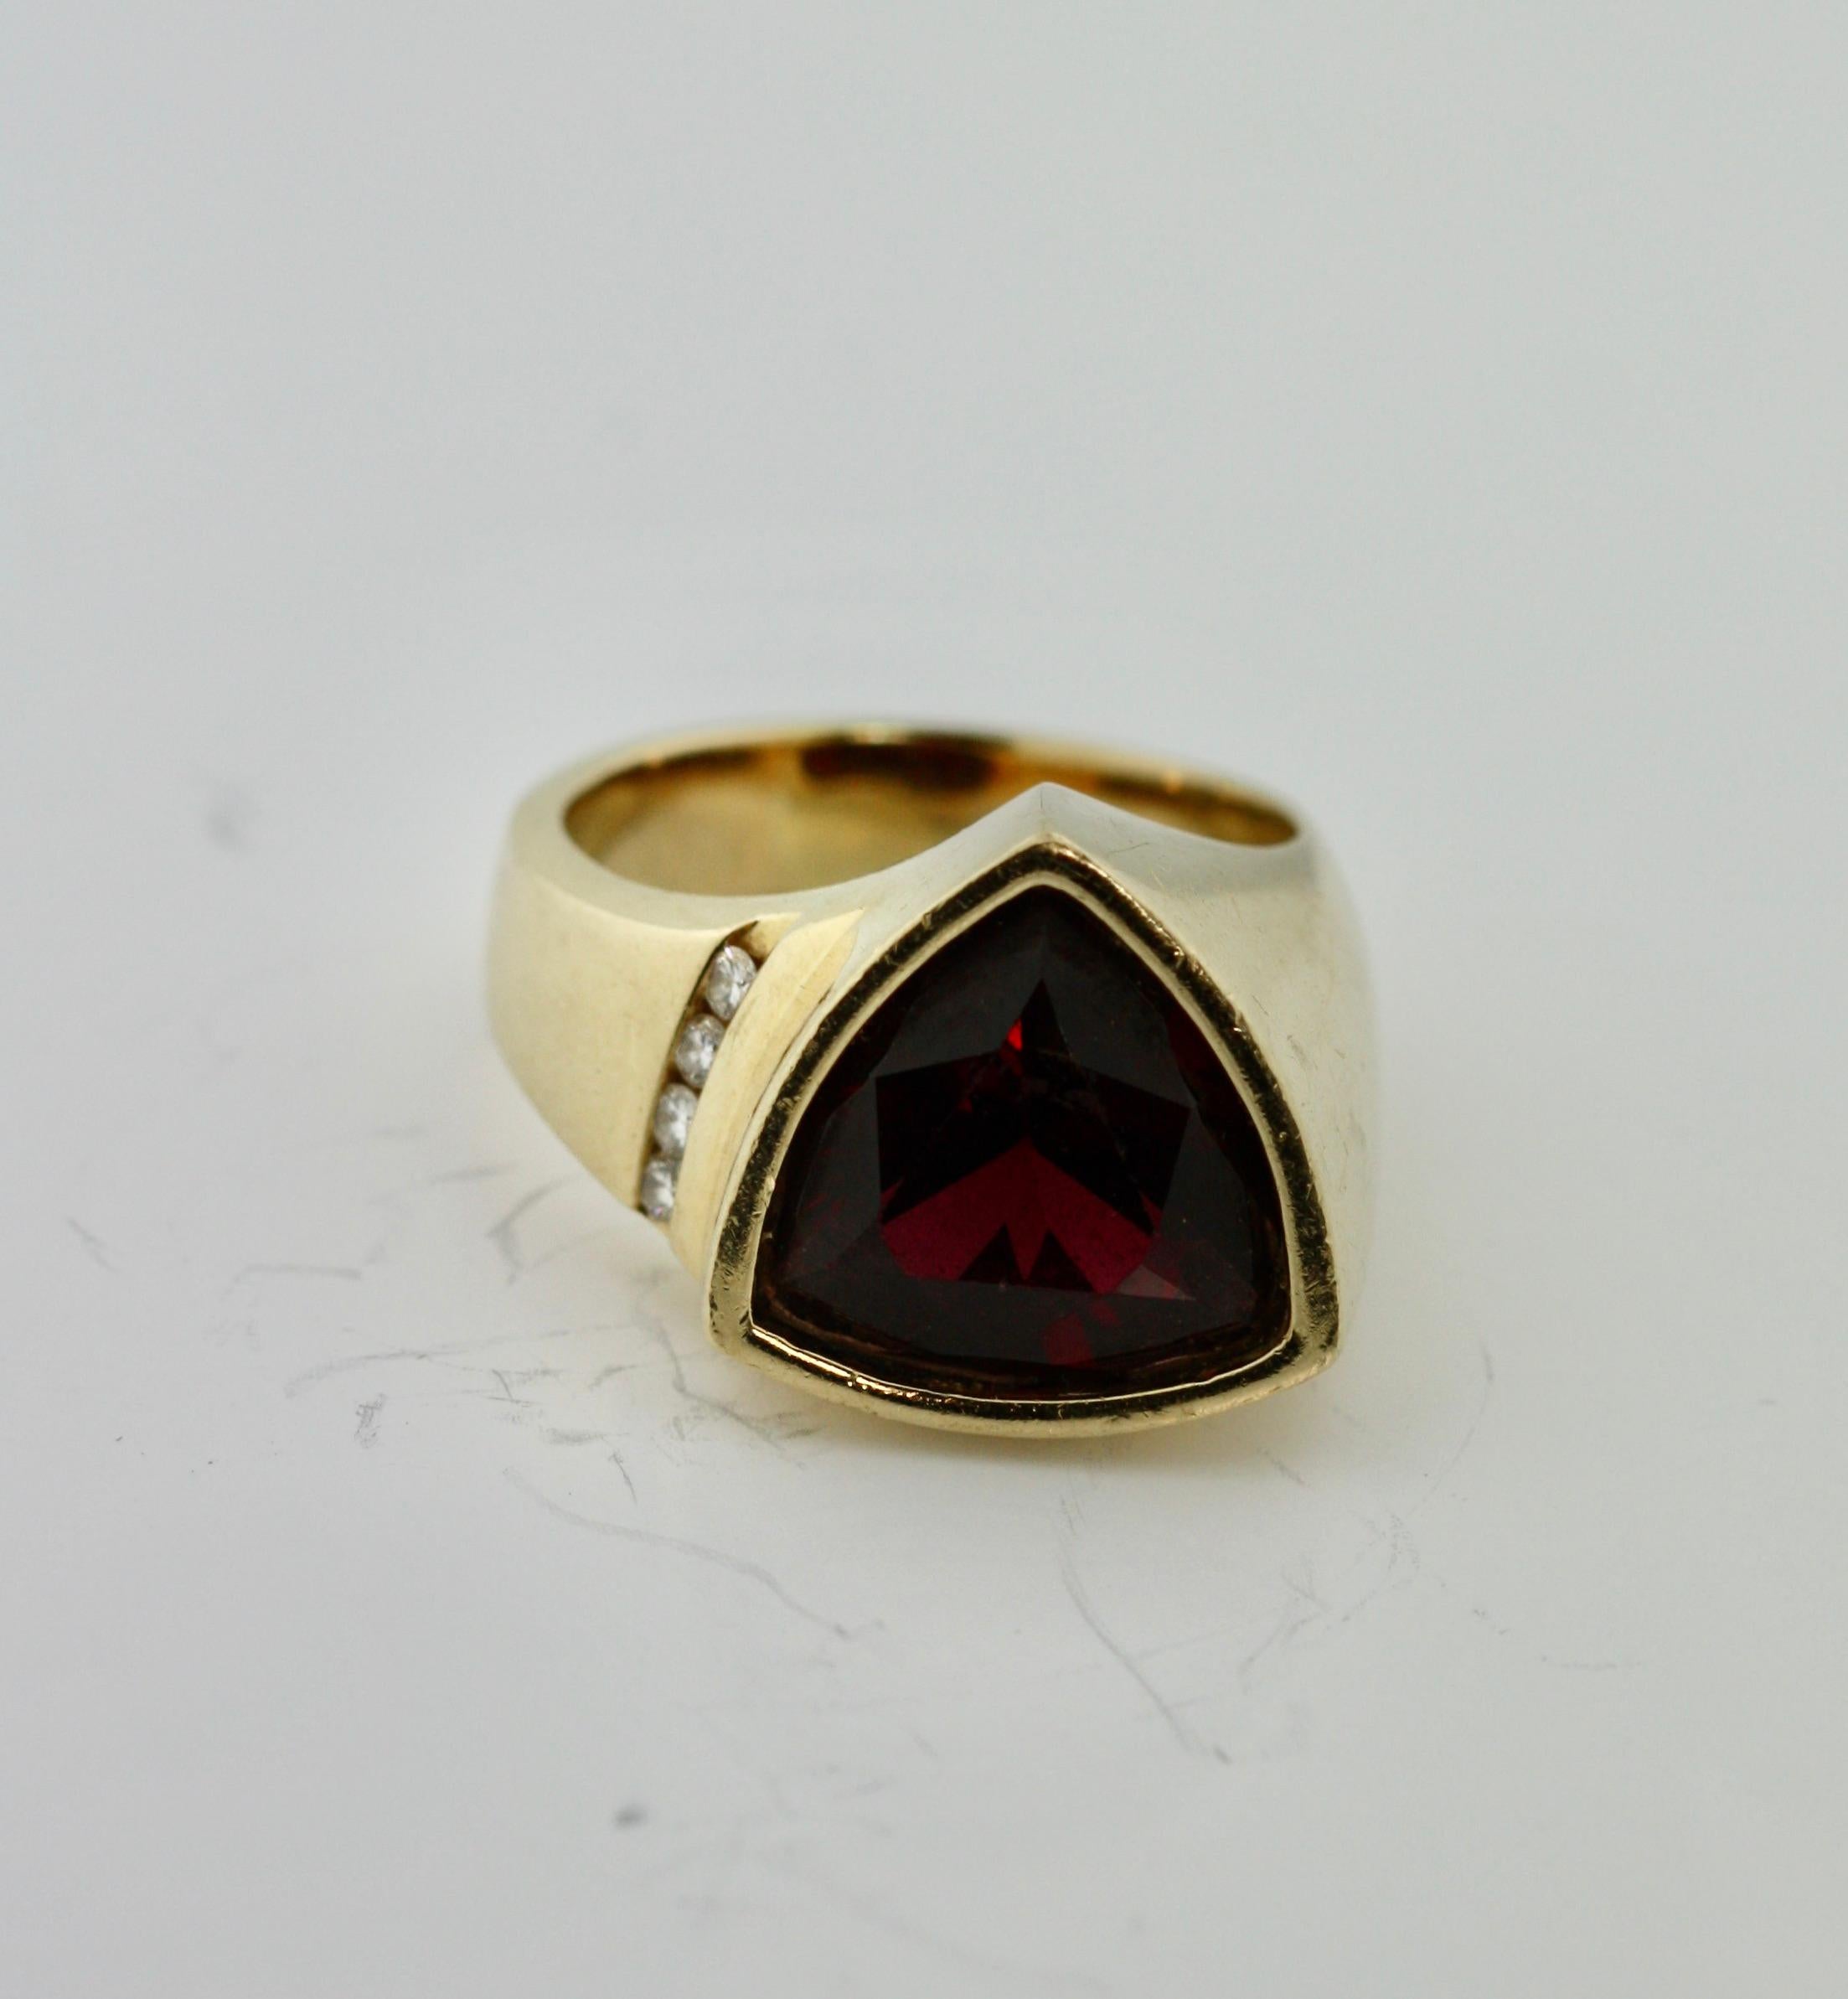 18kt Yellow Gold, Diamond and Garnet Ring
the modified triangular-shaped tsavorite garnet weighing approximately 12.00 carats, ring size 12